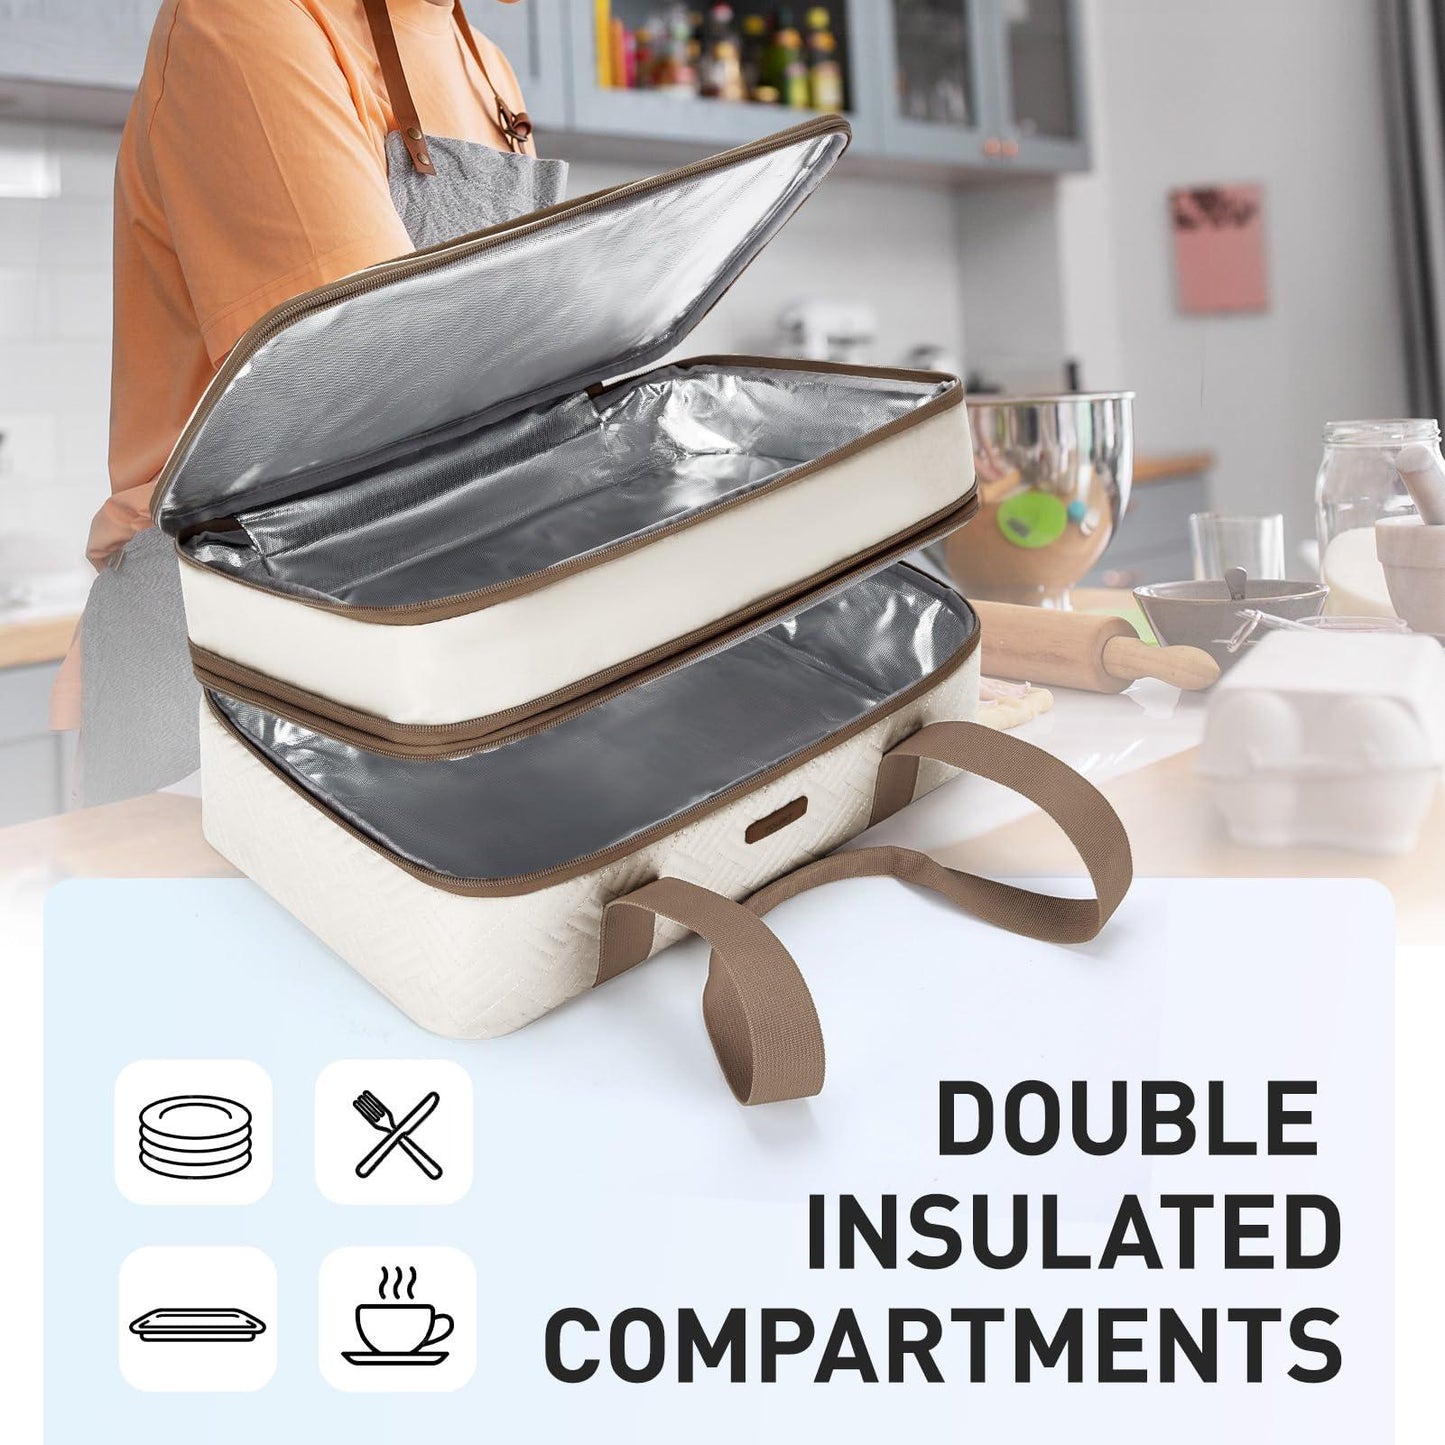 TOURIT Double Insulated Casserole Carrier for Hot or Cold Food Expandable Thermal Food Carrier for Pinic Cookouts Potluck Parties Fits 9” x 13” Baking Dish - CookCave